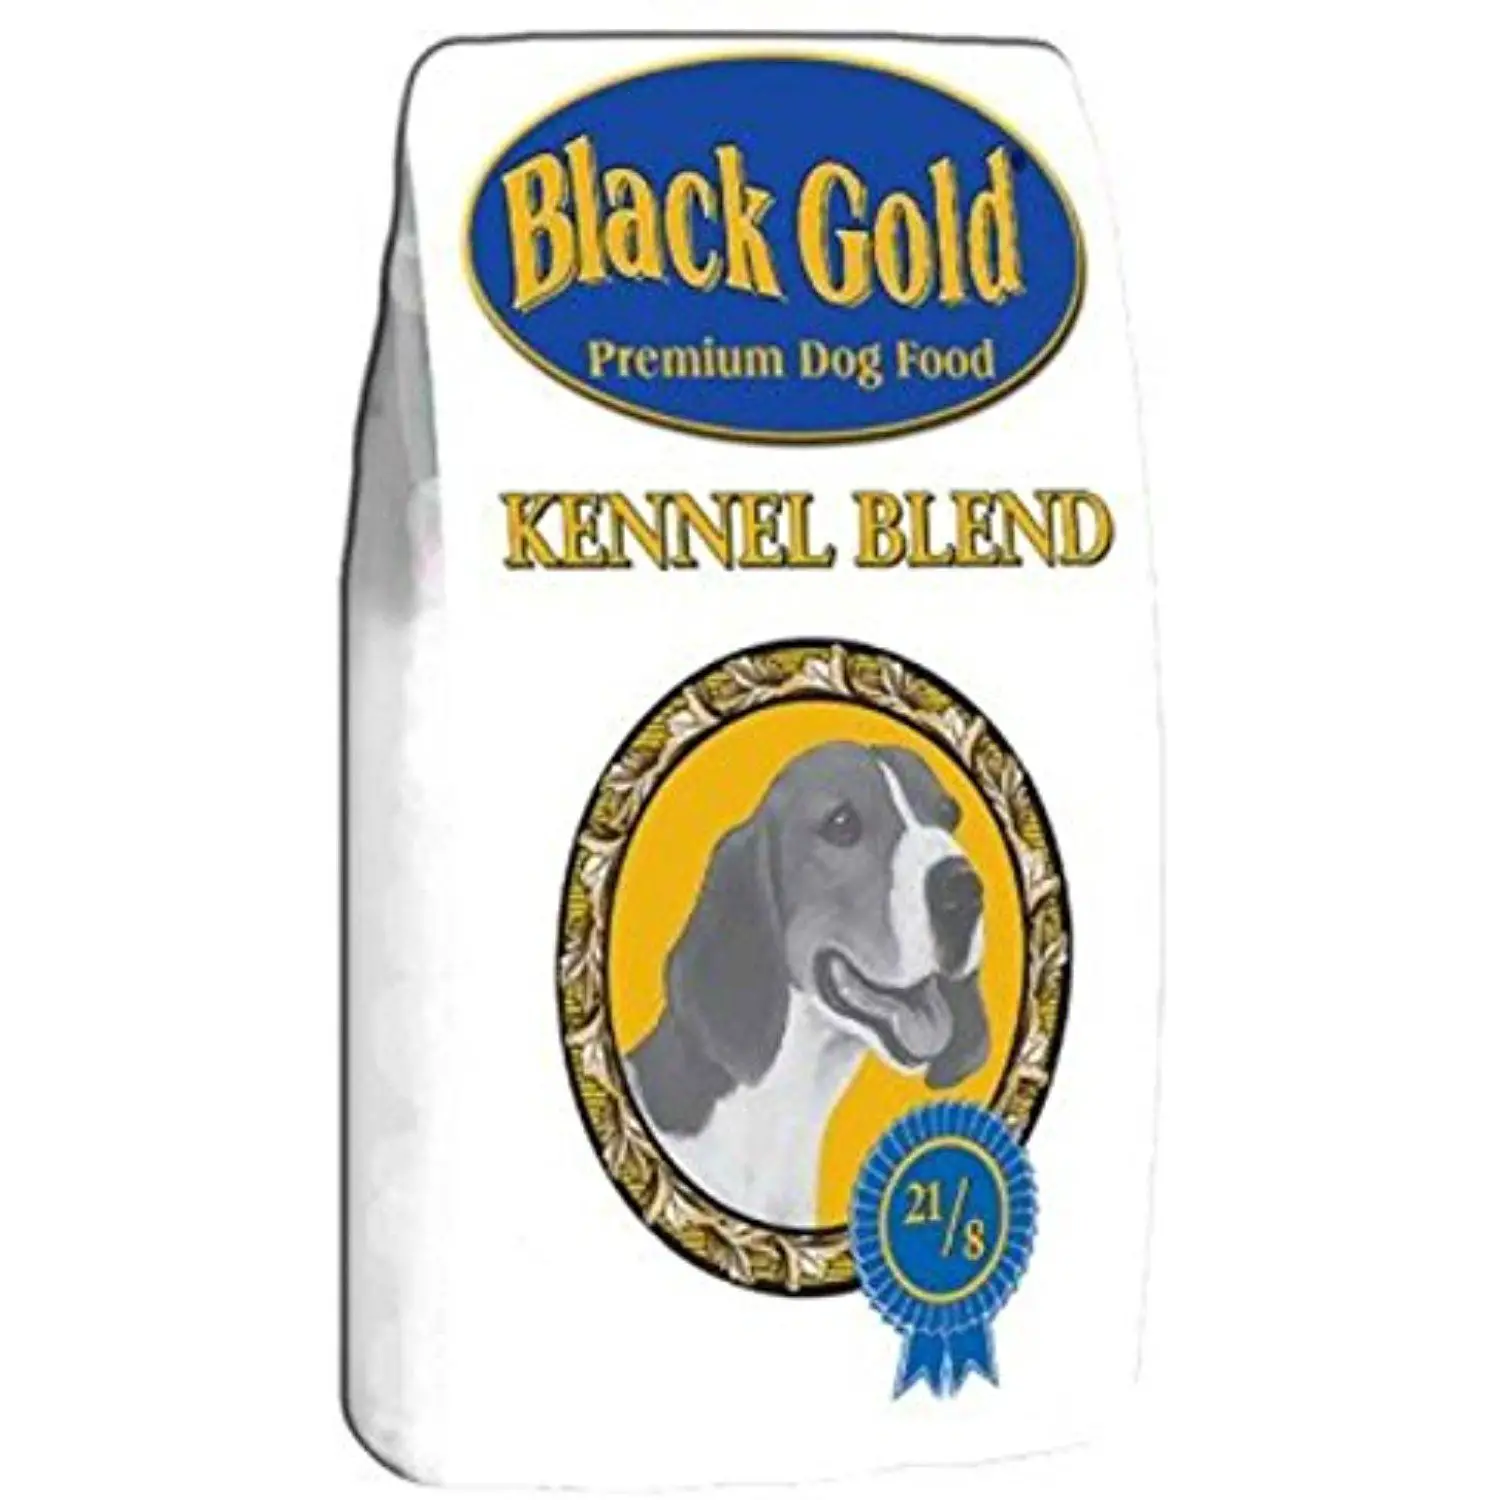 Black And Gold Dog Food / Black Gold Dog Food Review Muscle Bully ...